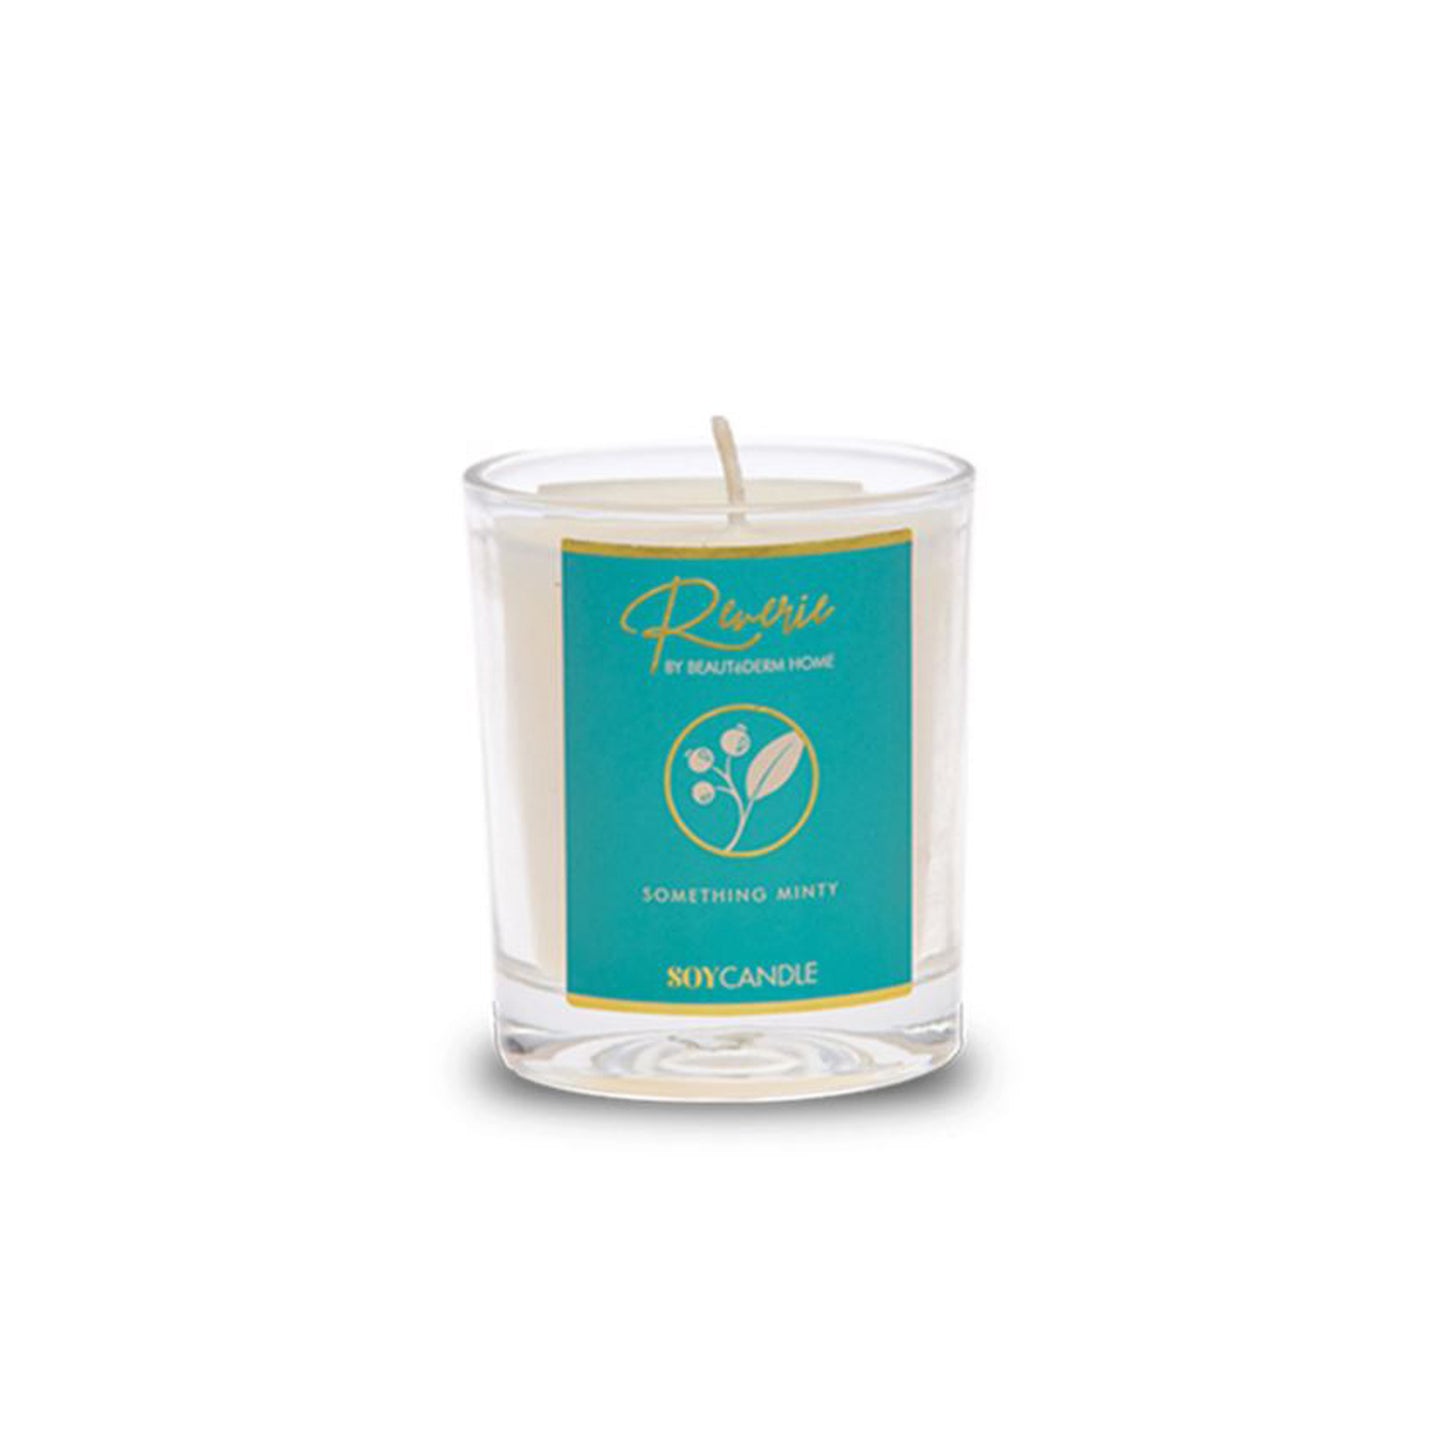 Beautederm Home Reverie Soy Candle Scents Something Minty